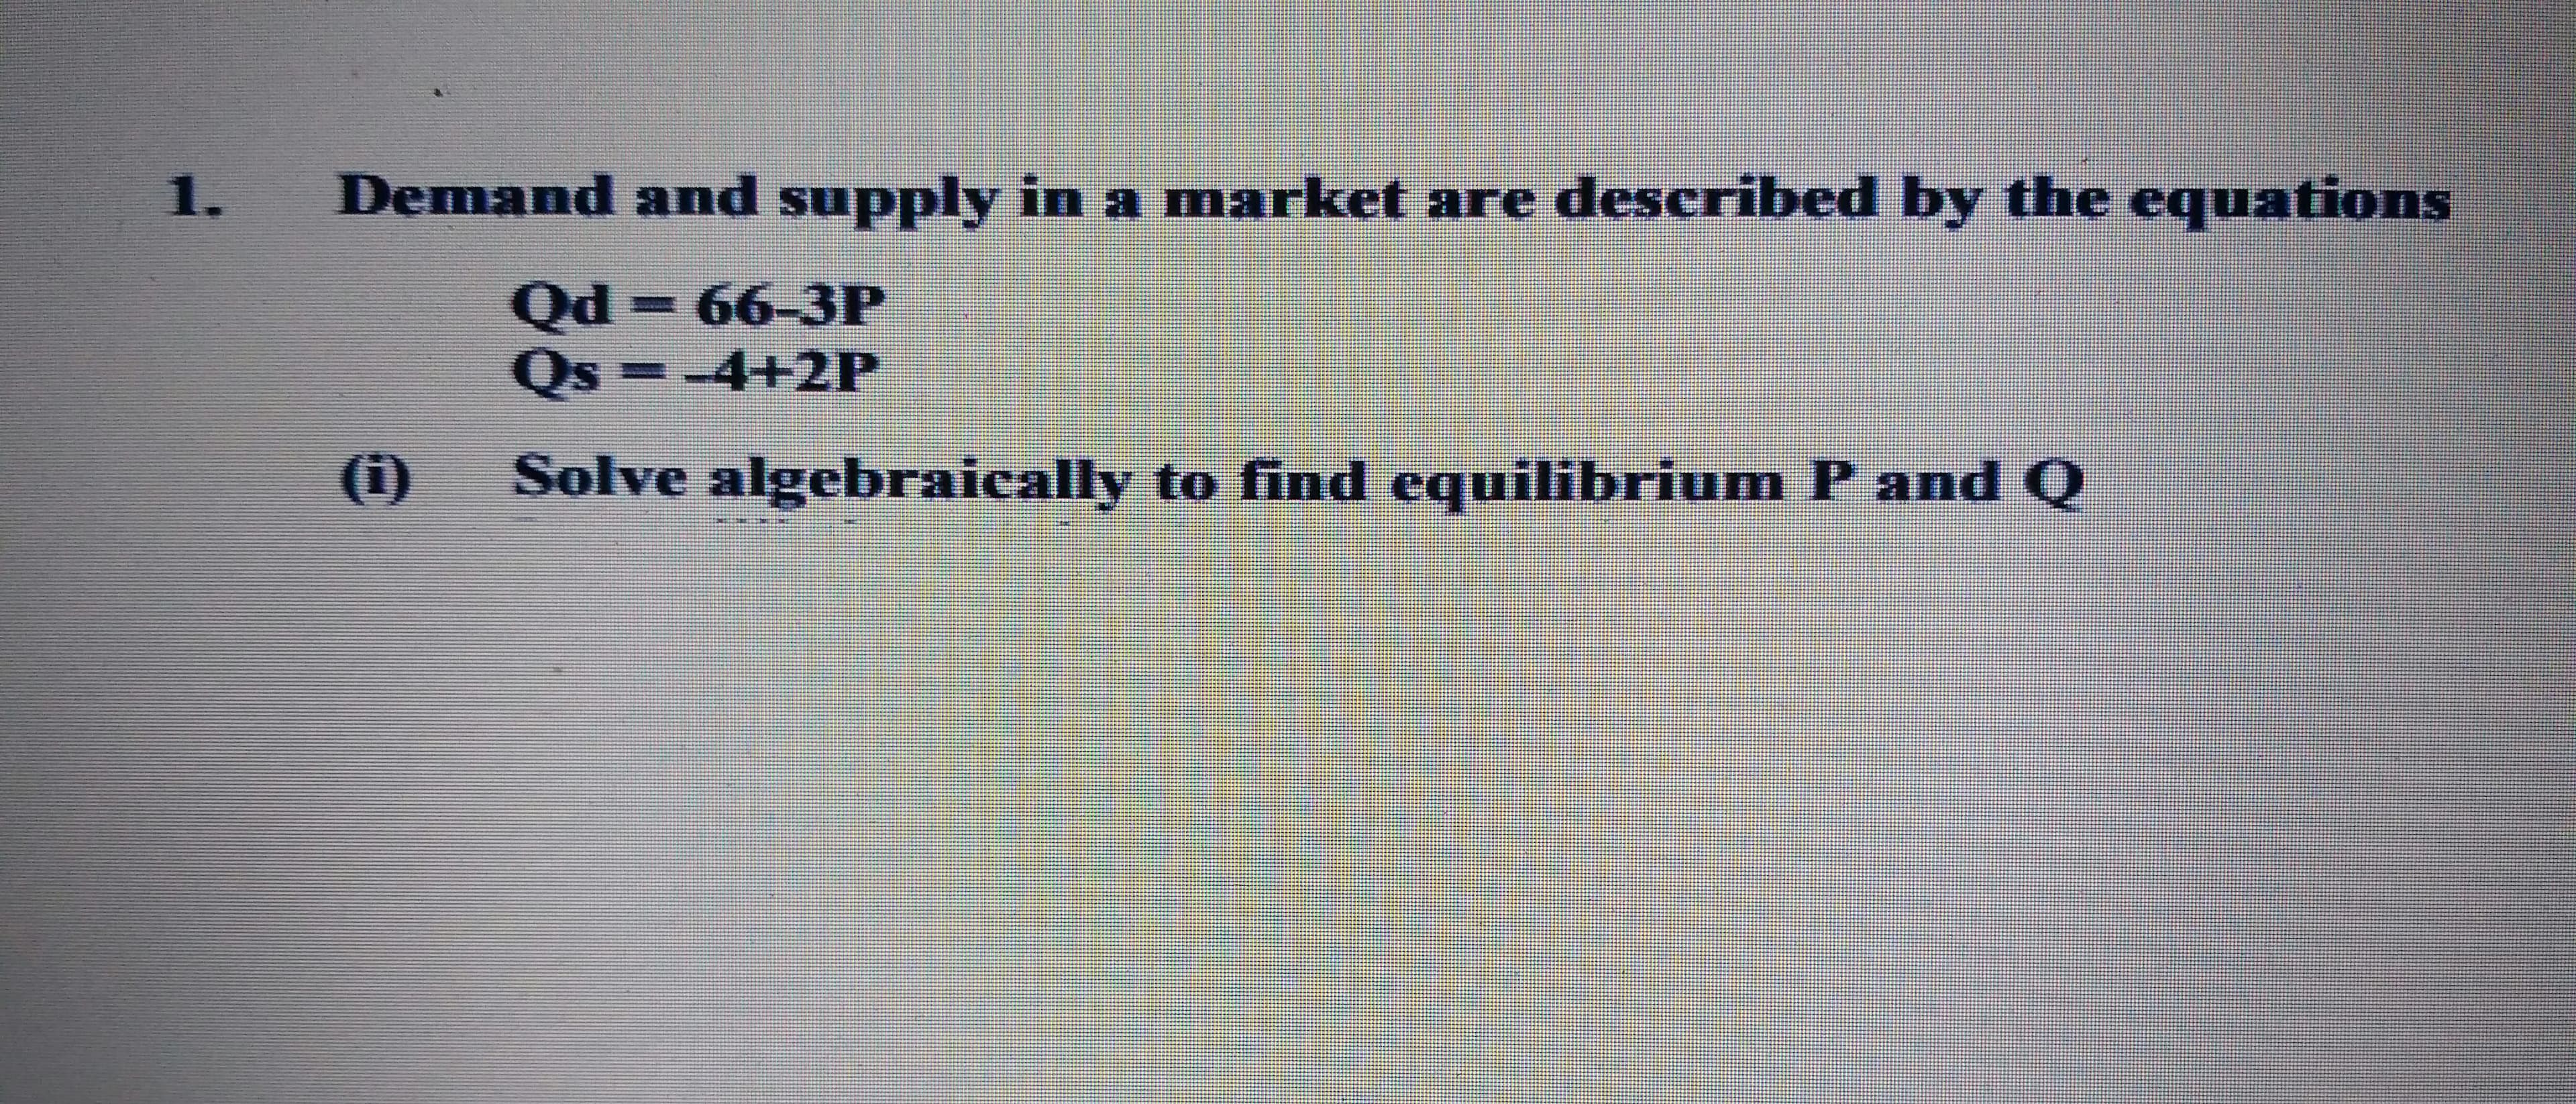 Demand and supply in a market are described by the equations
Qd=66-3P
Qs
Os =-4+2P
